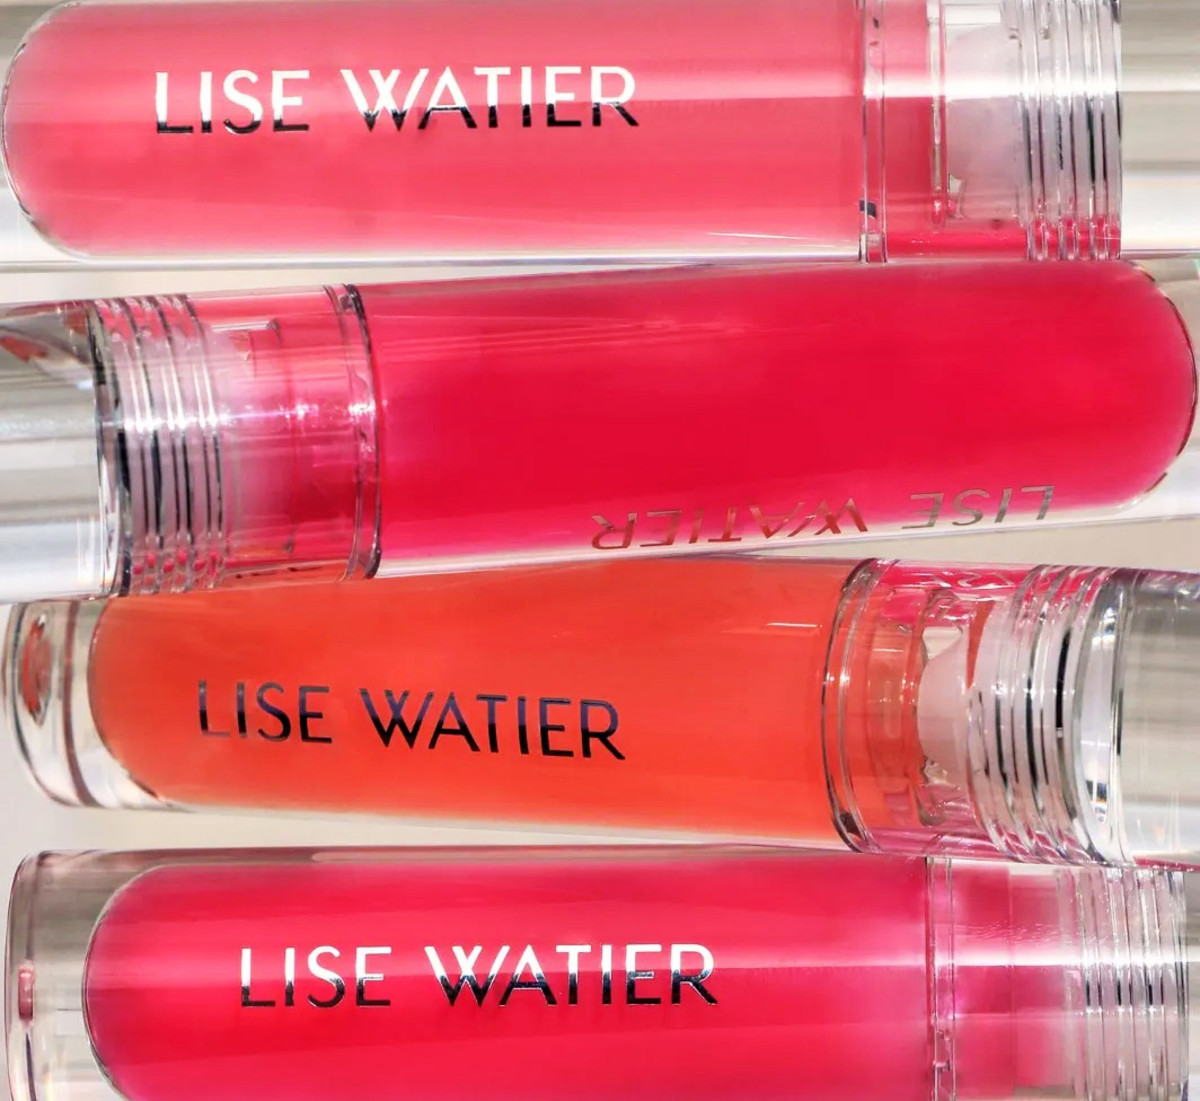 Watier Love My Lips Caring Lip Oil in Framboise, Rosehip (LE), Cantaloup, and Rosehip again (photo: Watier)